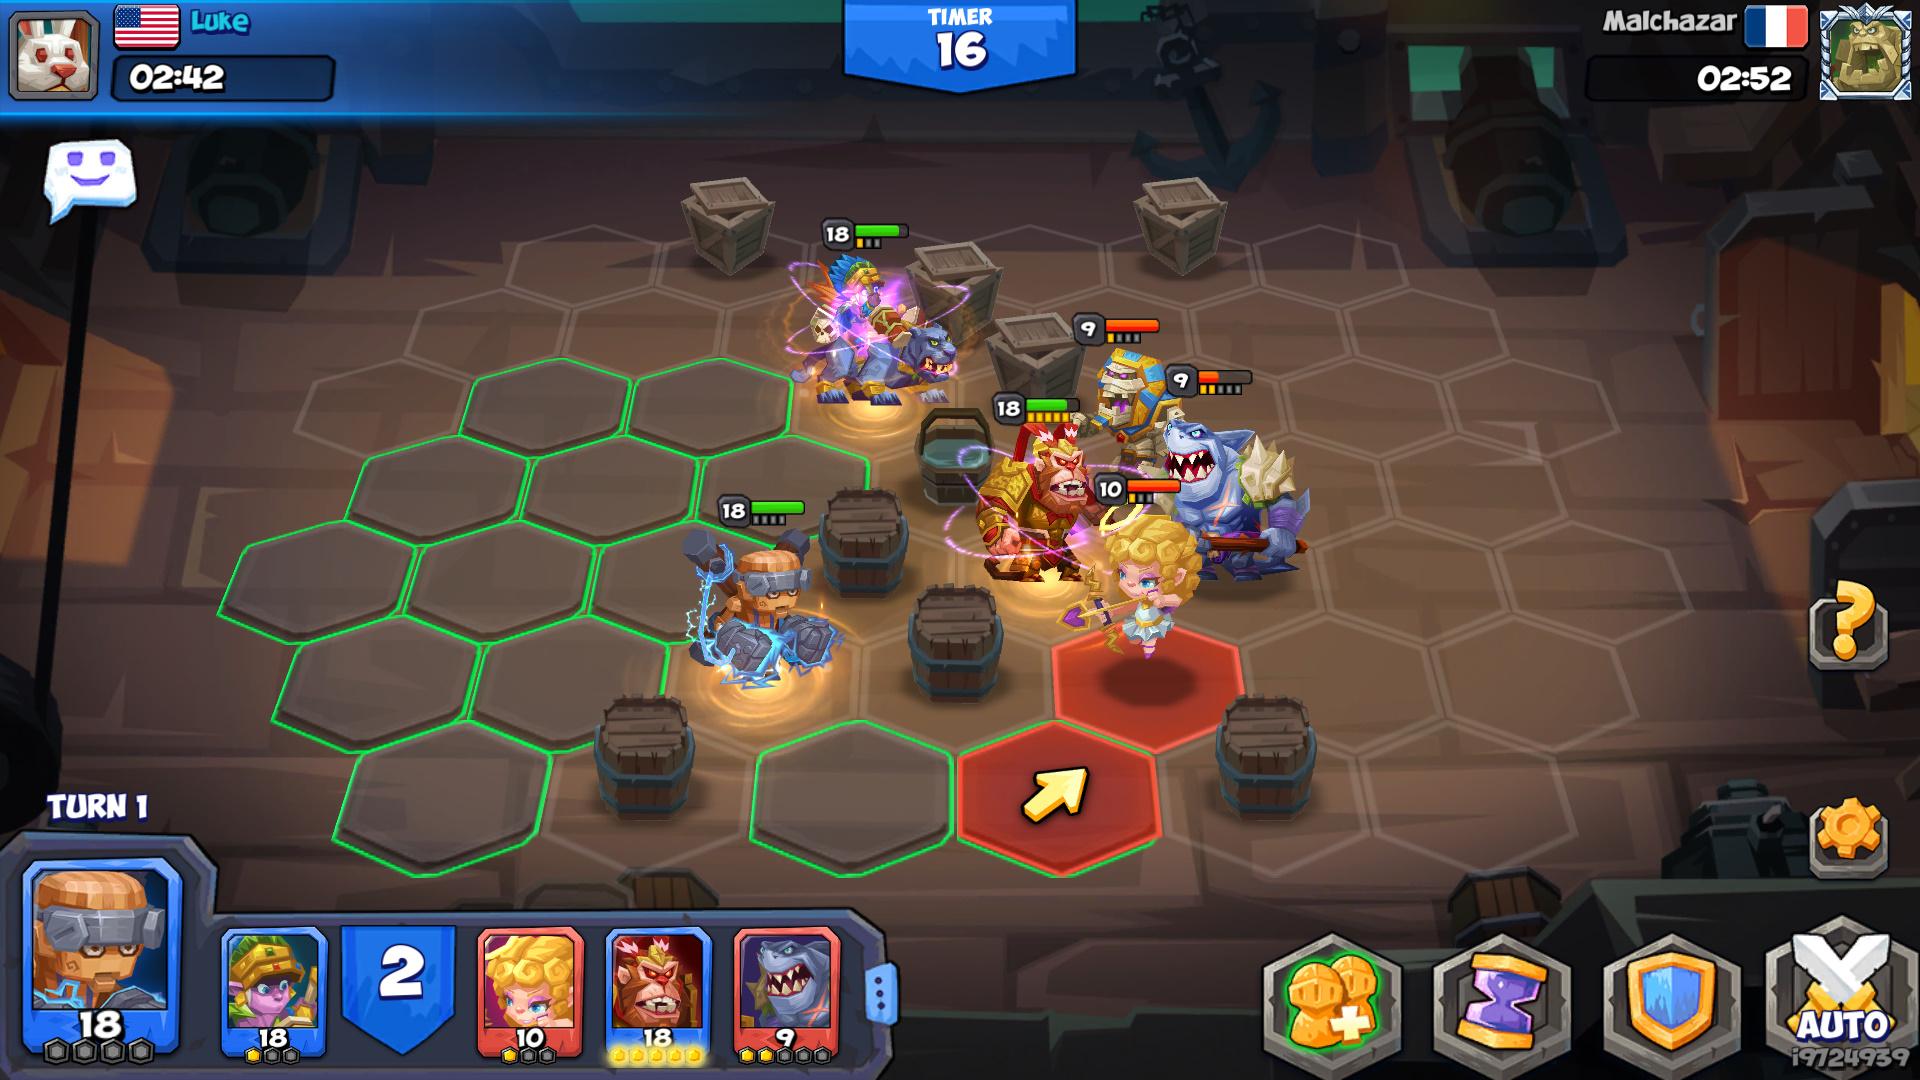 Screenshot №21 from game Tactical Monsters Rumble Arena